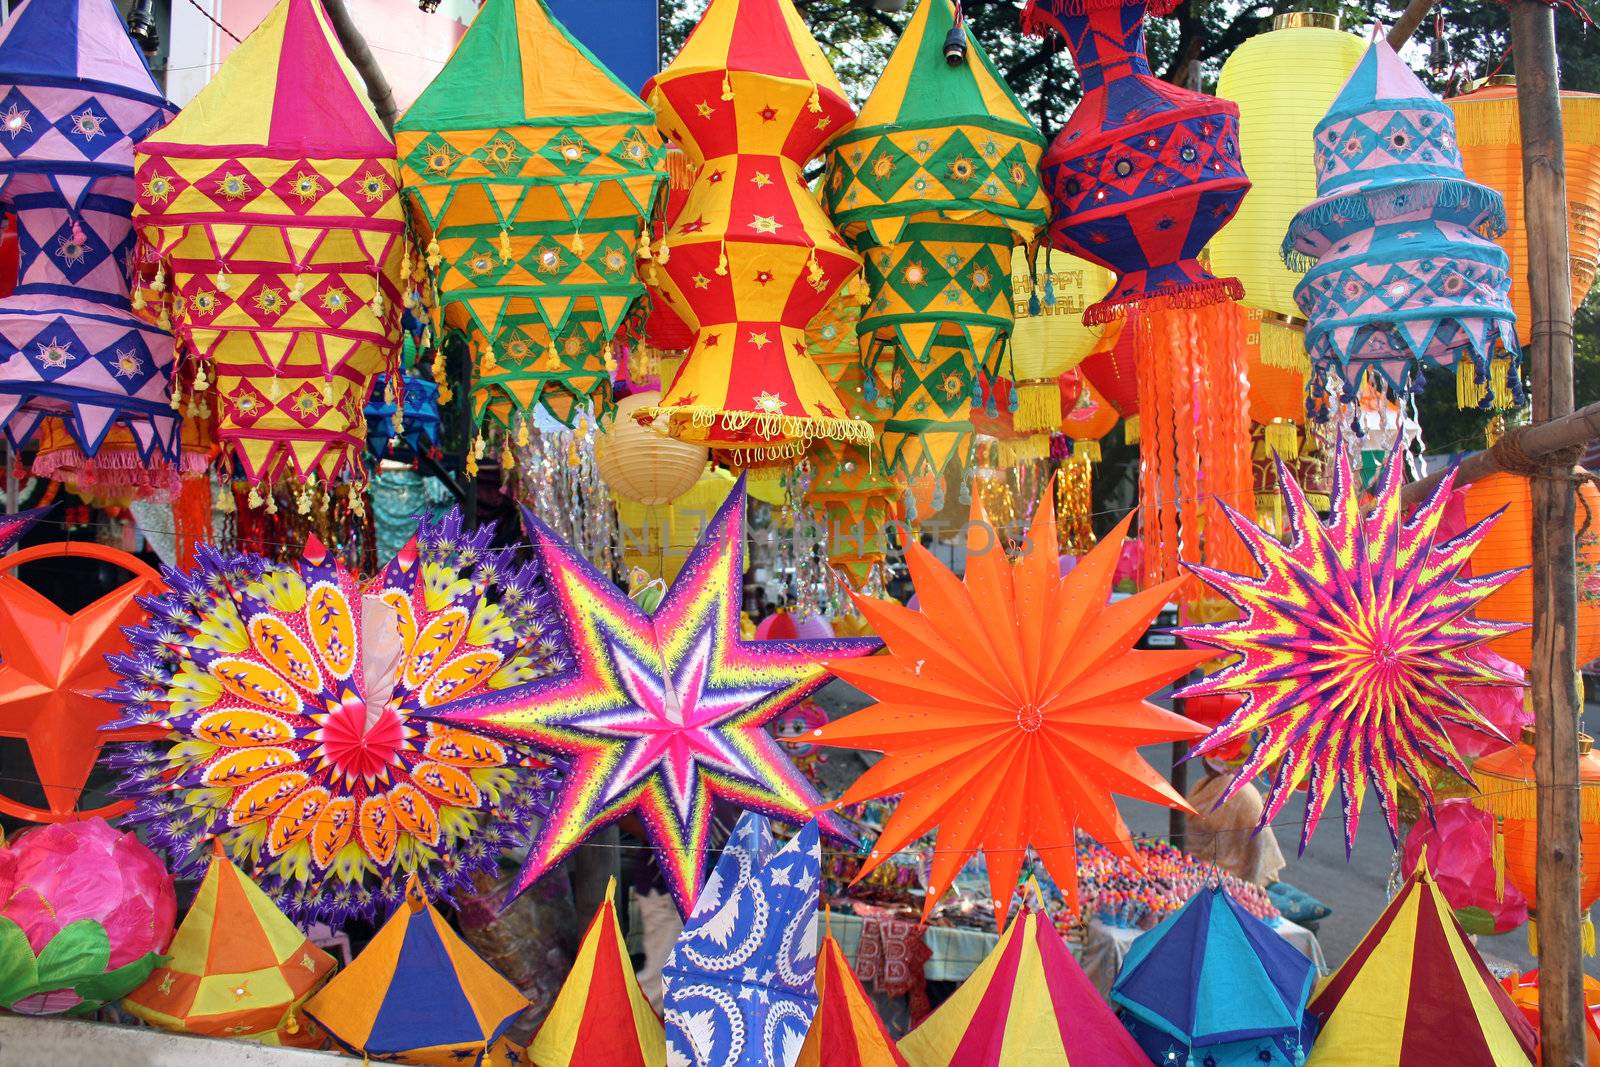 A background of beautiful lanterns in traditional colors and design for Diwali / Christmas festival in India.